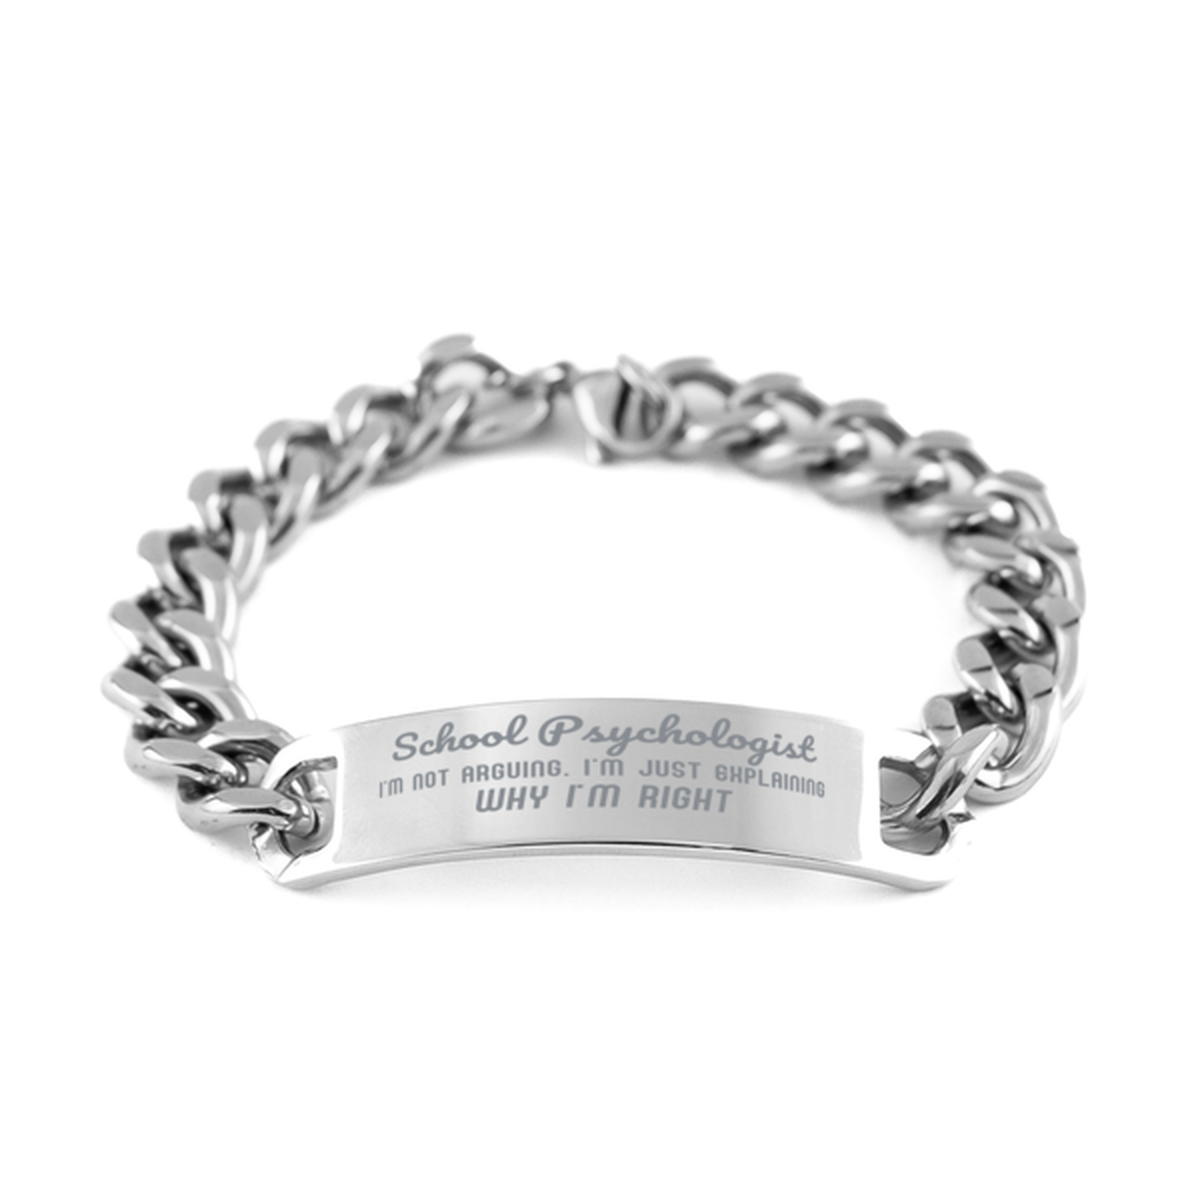 School Psychologist I'm not Arguing. I'm Just Explaining Why I'm RIGHT Cuban Chain Stainless Steel Bracelet, Graduation Birthday Christmas School Psychologist Gifts For School Psychologist Funny Saying Quote Present for Men Women Coworker